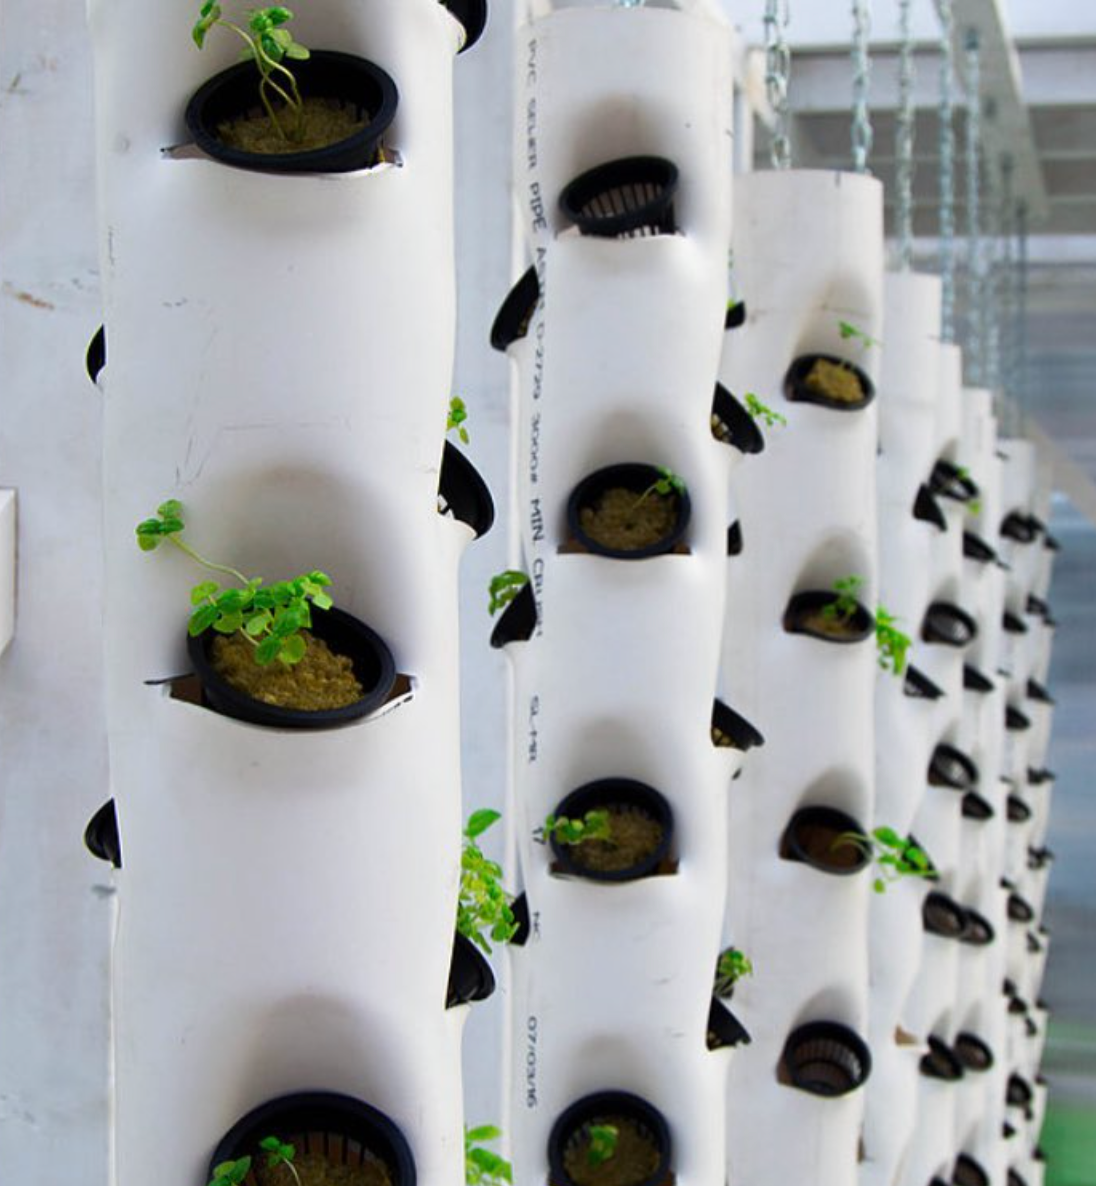 The Importance of Hydroponics for Youth | by Sasha Cohen Ioannides | Medium